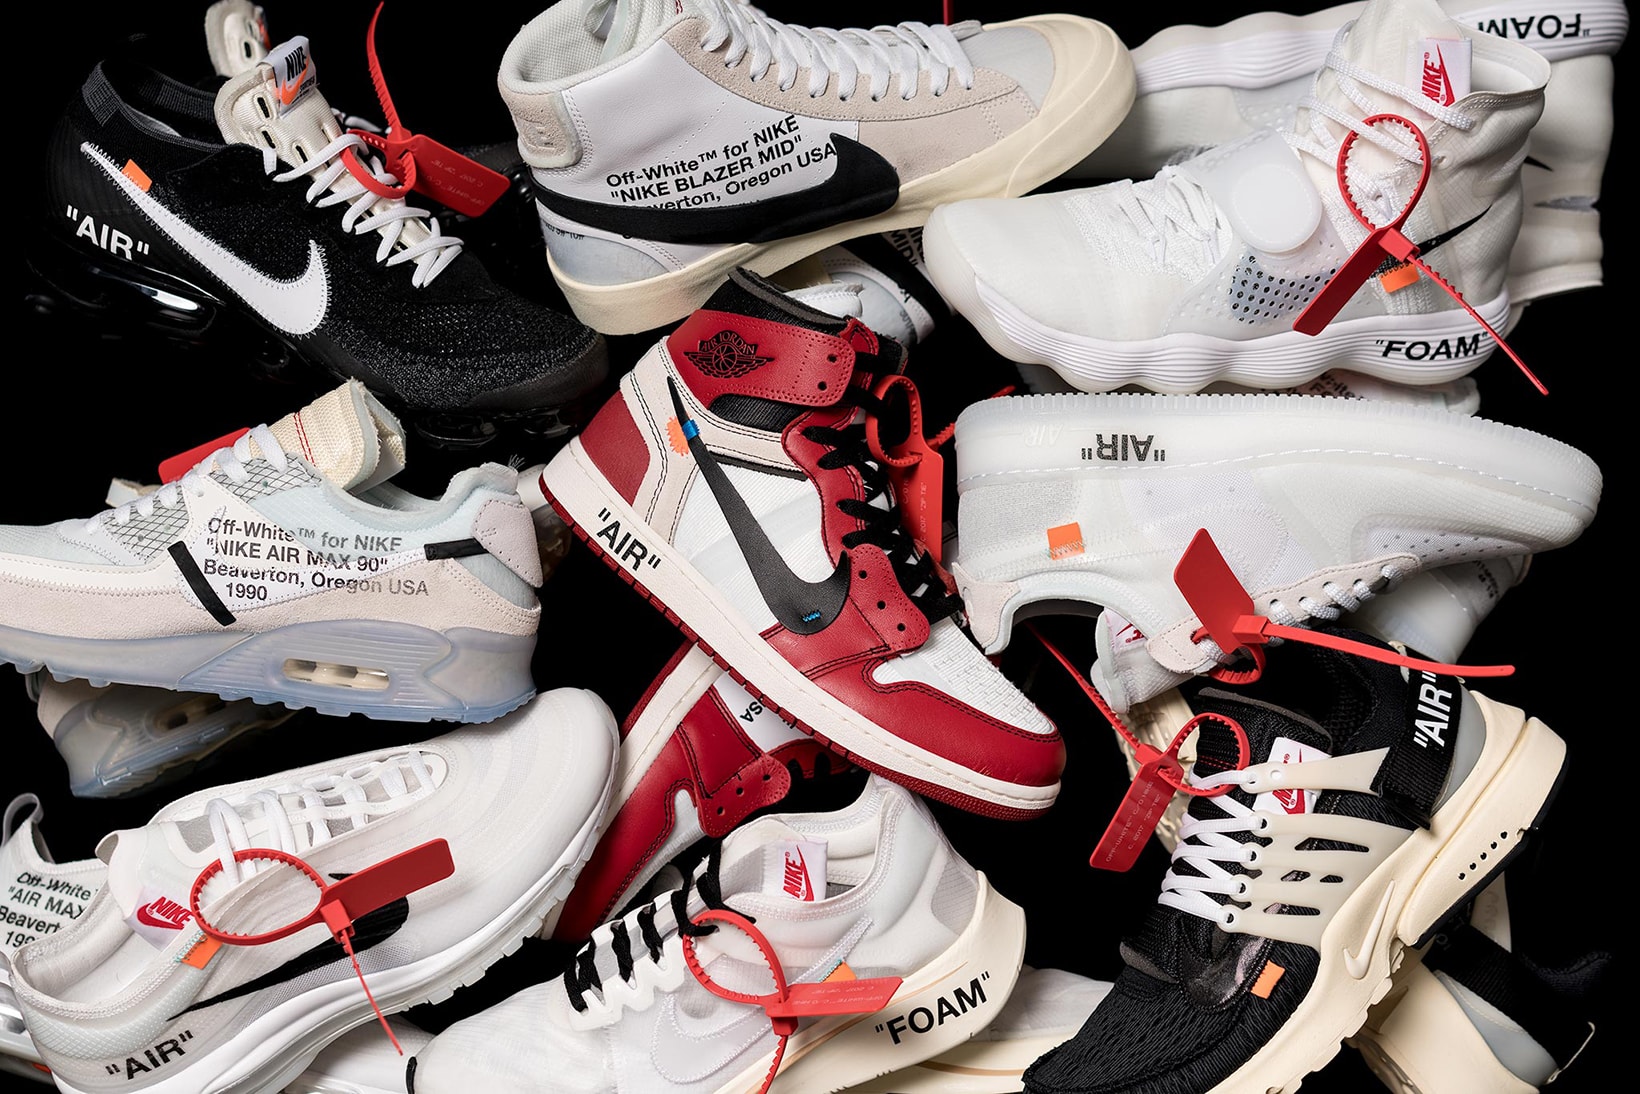 Virgil Abloh Speaks on his OFF-White x Nike Collection